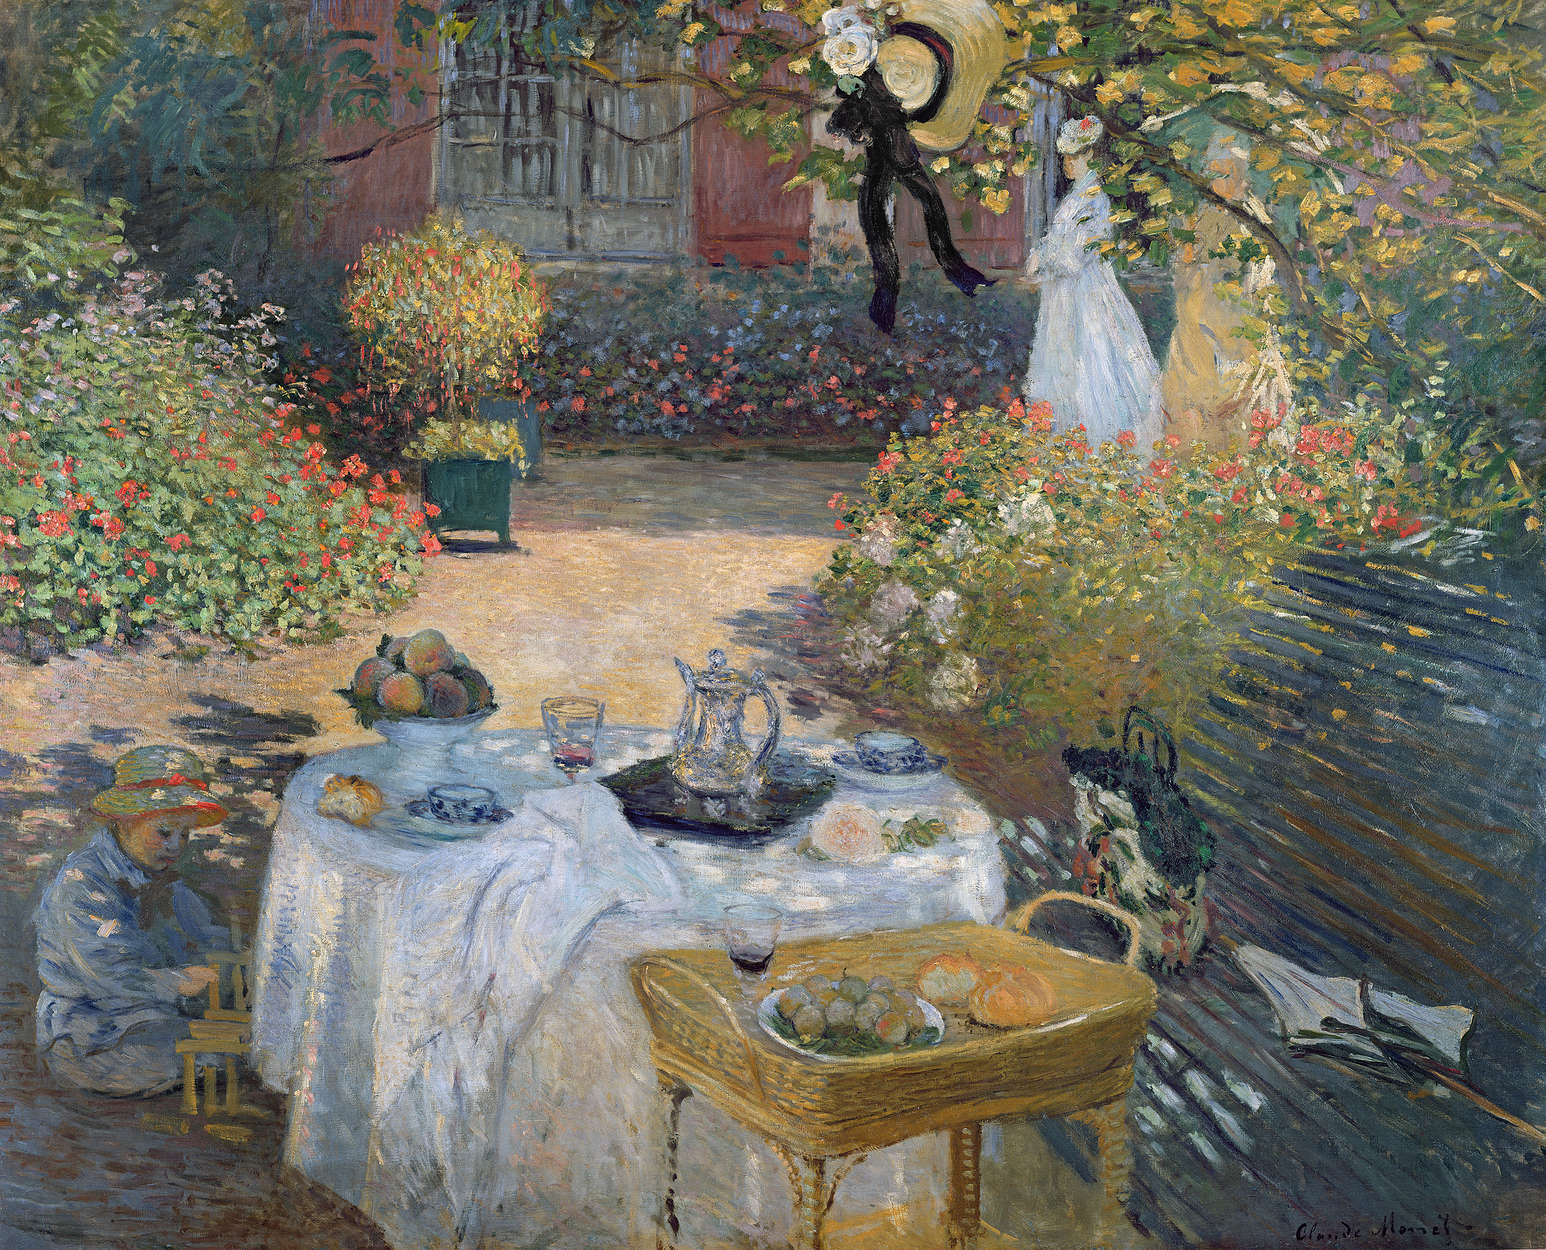             Photo wallpaper "The midday meal: Monet's garden in Argenteuil" by Claude Monet
        